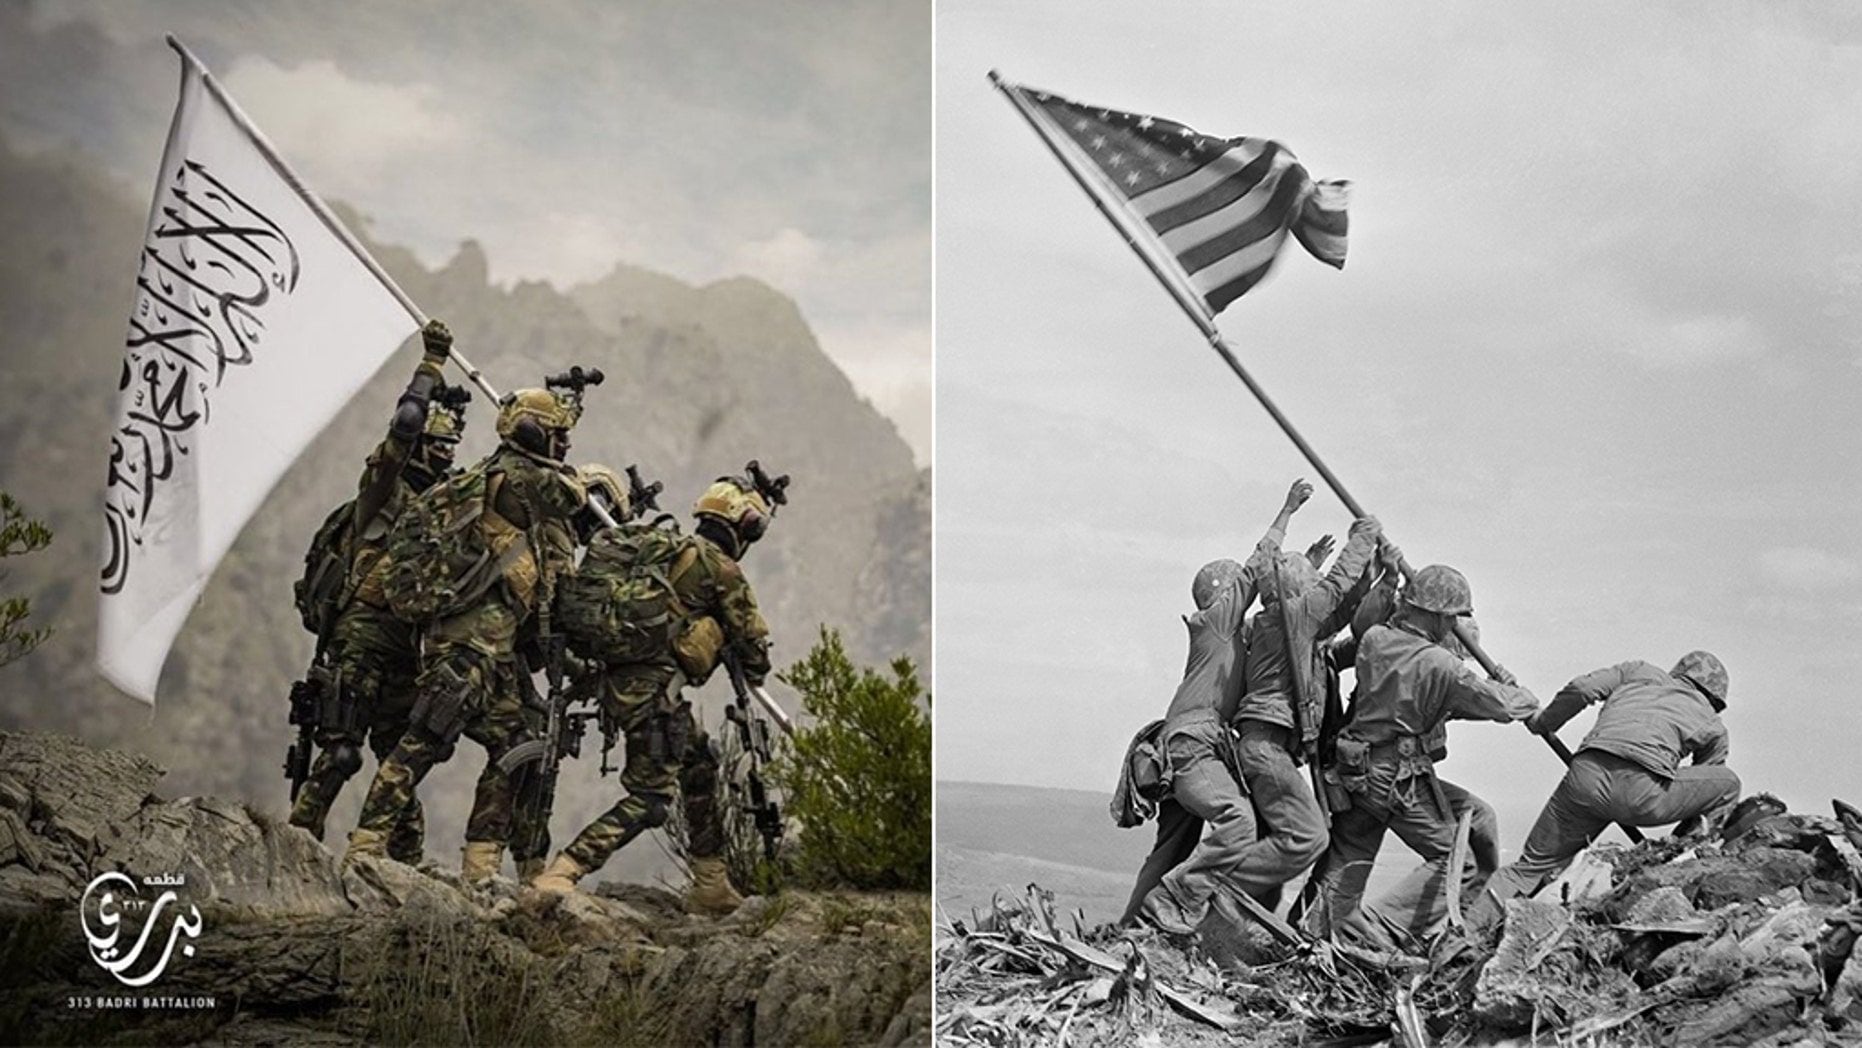 Who was and what became of the photographed soldier made famous